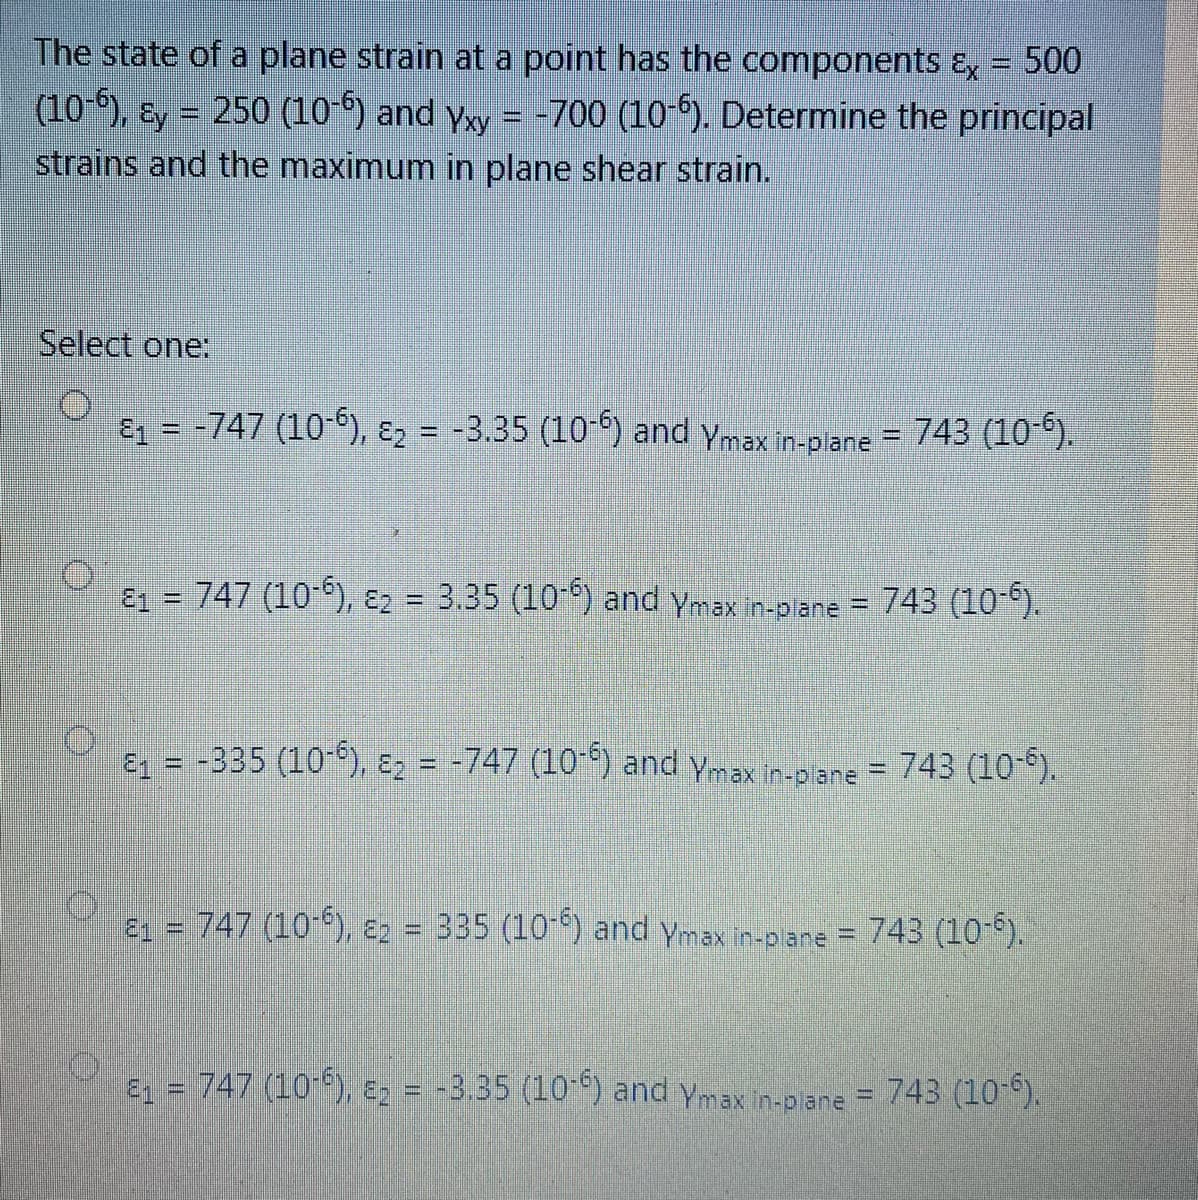 The state of a plane strain at a point has the components E, = 500
(10-), ɛy = 250 (10-6) and yxy = -700 (10-5). Determine the principal
strains and the maximum in plane shear strain.
Select one:
ɛz = -747 (10-6), ɛ2 = -3.35 (10-) and ymax in-piane = 743 (10).
E1 = 747 (10-), E2 = 3.35 (10-) and ymax in-plare = 743 (10°).
%3D
E1 = -335 (10-), E2 = -747 (10 °) and ymax in-piane = 743 (10-°).
%3D
21 = 747 (10-), E2 = 335 (10-) and ymax in-plane = 743 (10-*).
E = 747 (10-), E2 = -3.35 (10-) and ymax in-plane = 743 (10-).
